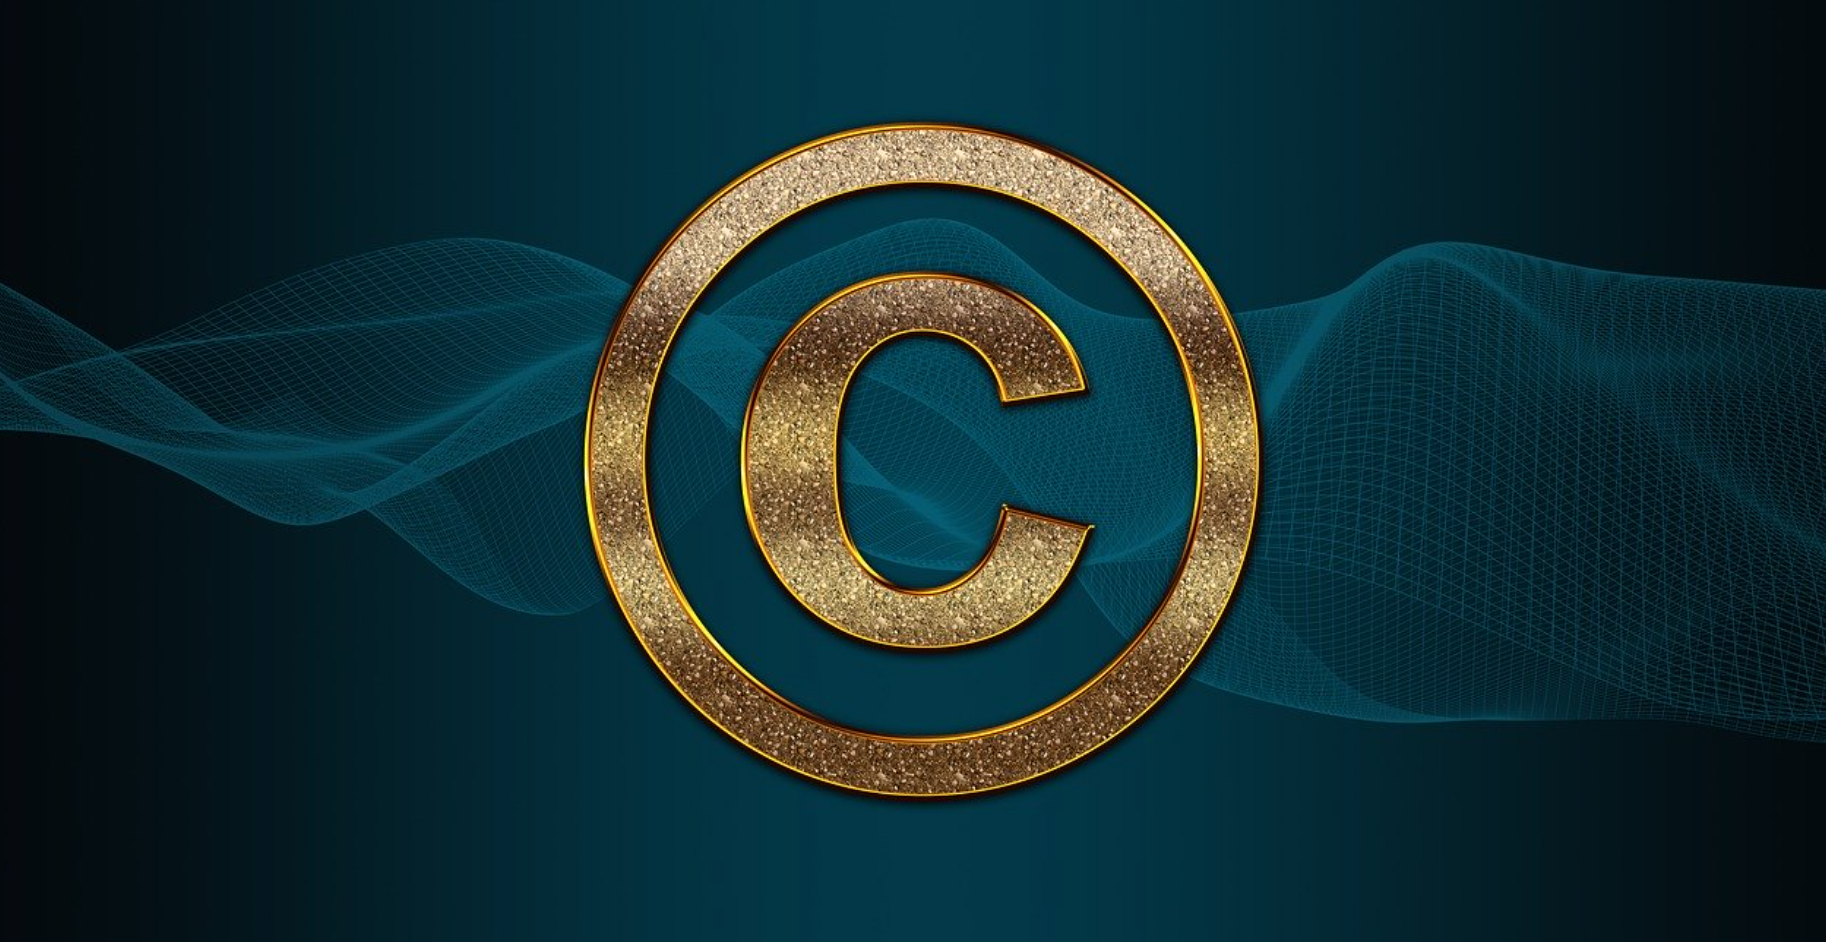 Copyright symbol in gold on a blue background with a wavy design; image by TheDigitalArtist, via Pixabay.com.